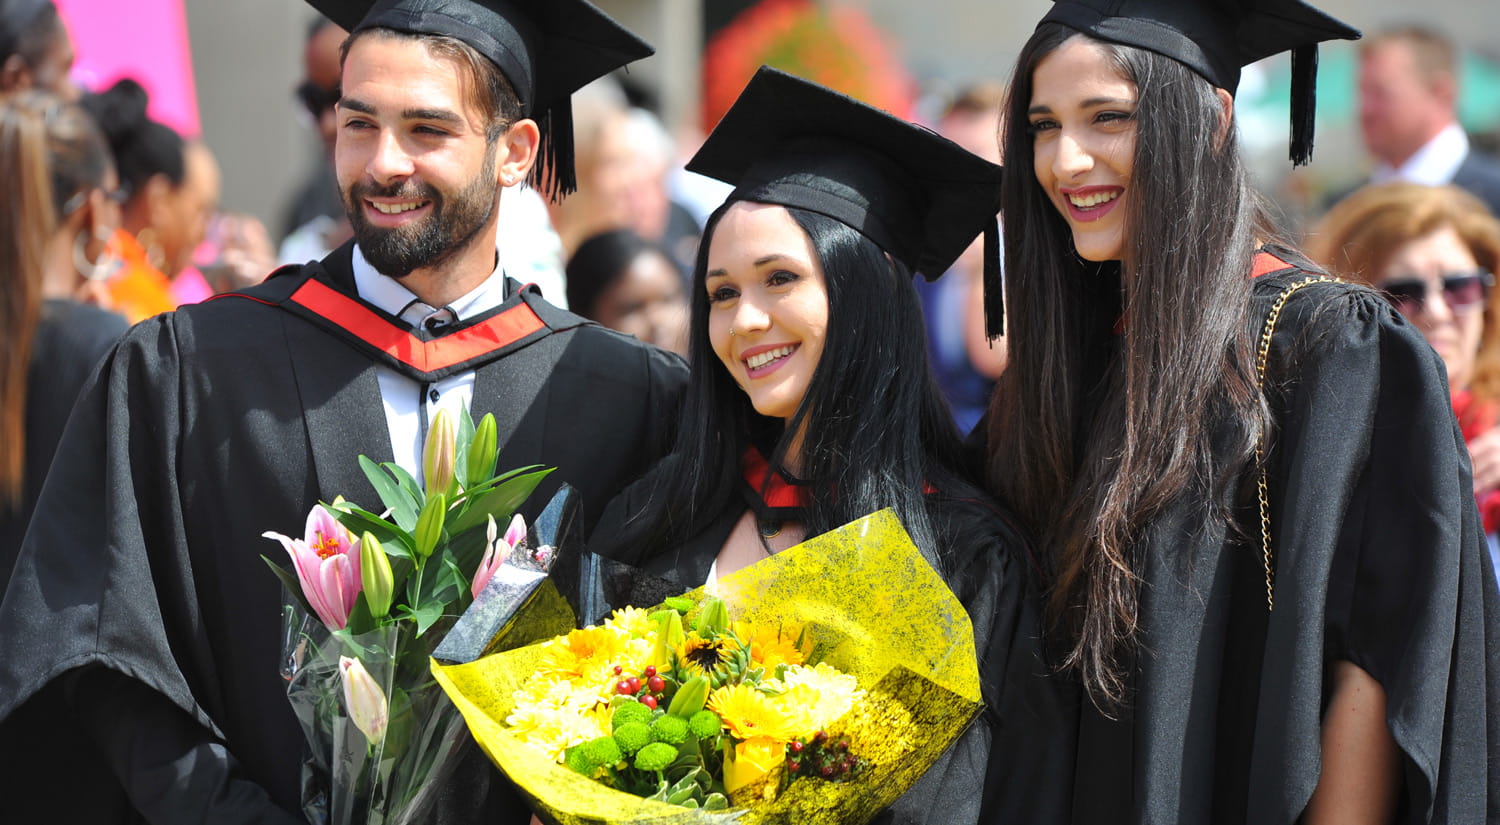 Three students in graduation robes